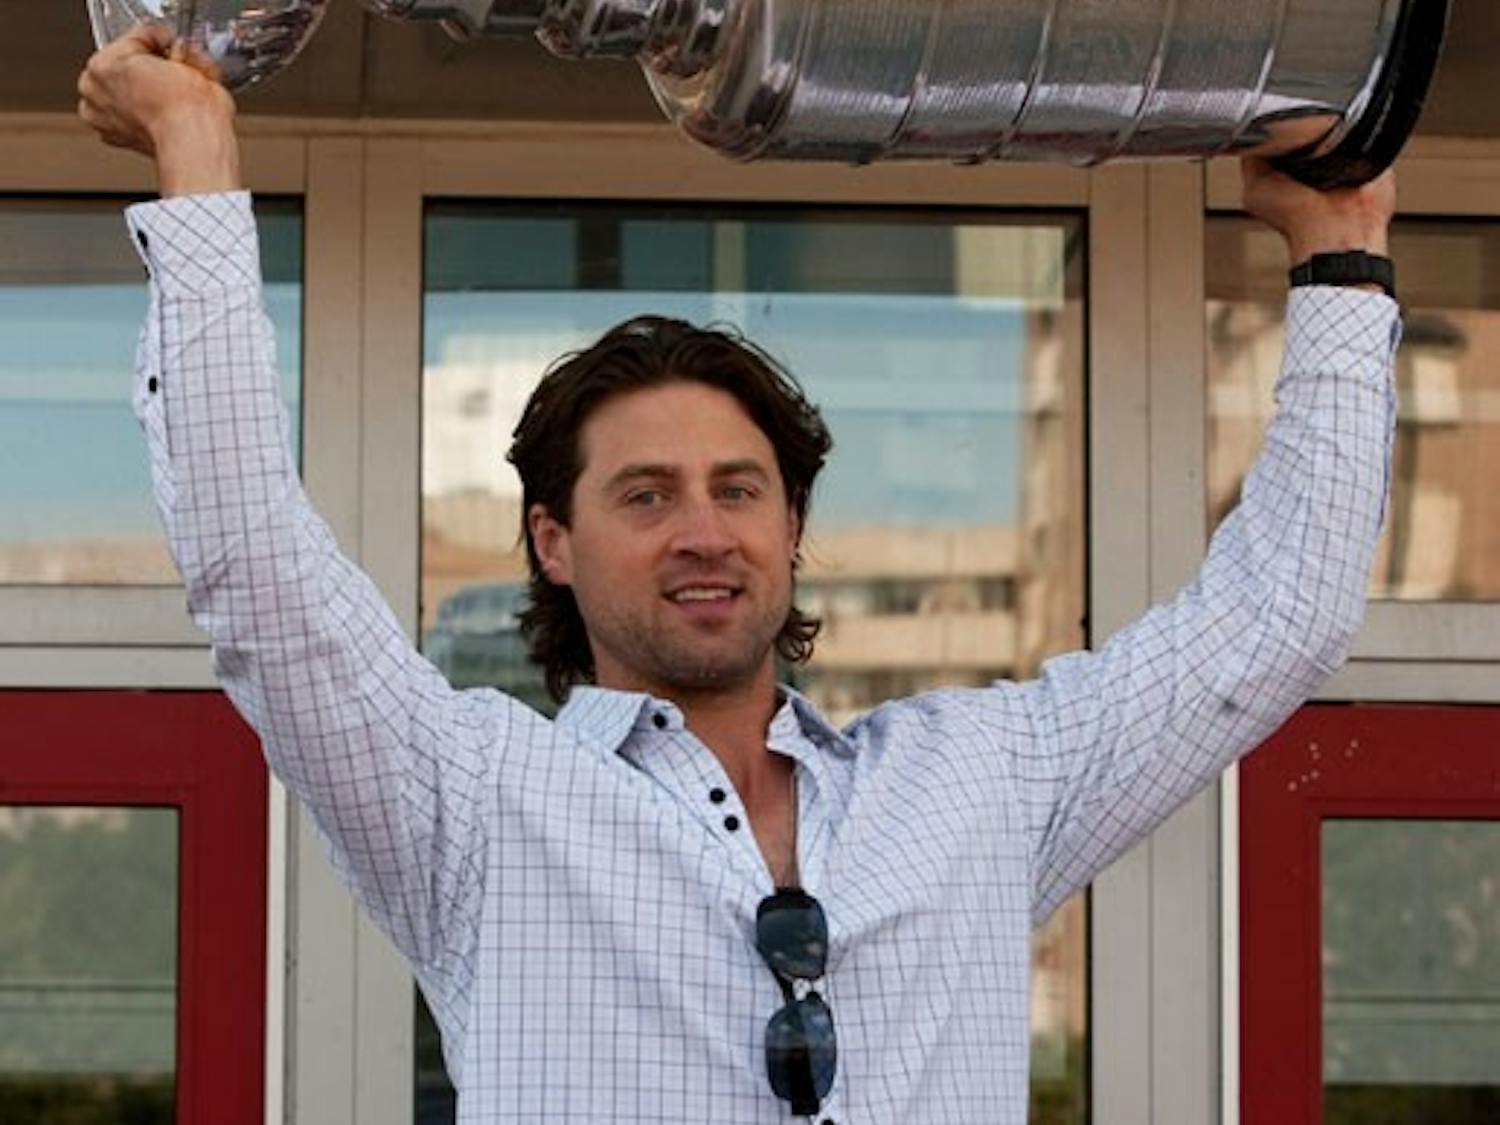 Burish makes Madison rounds with Cup